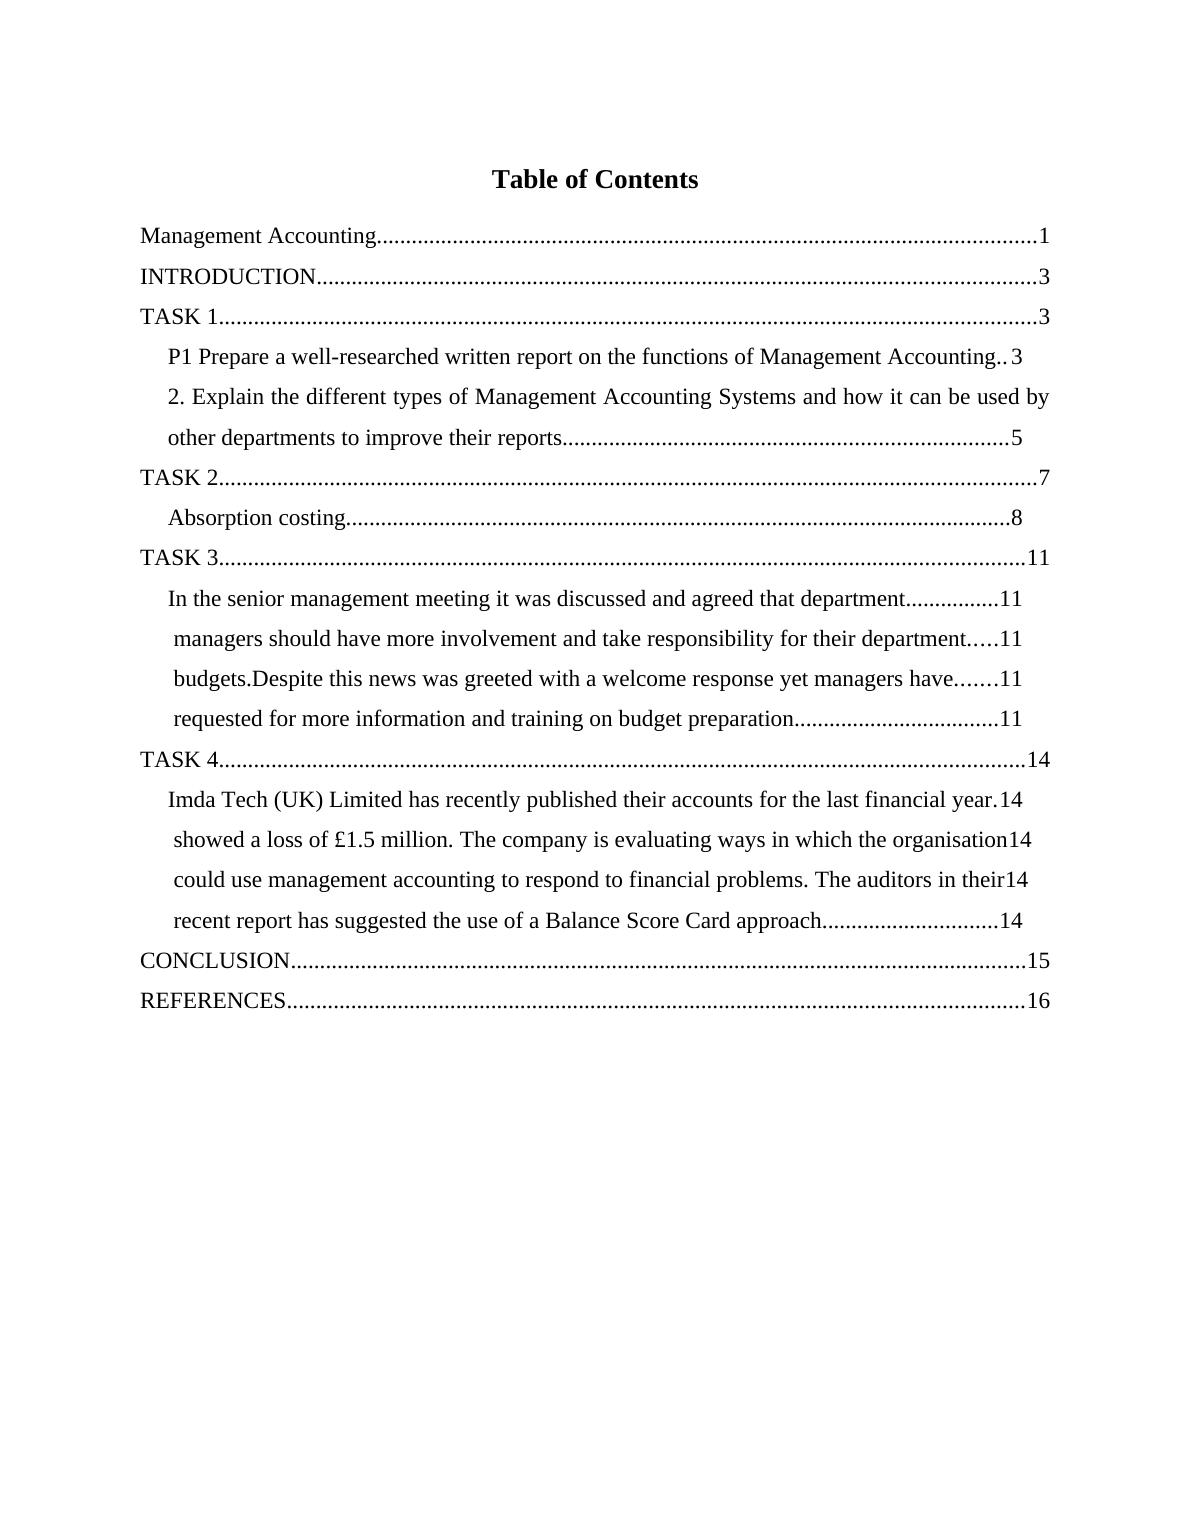 Management Accounting Assignment - Imda Tech (UK) Limited_2